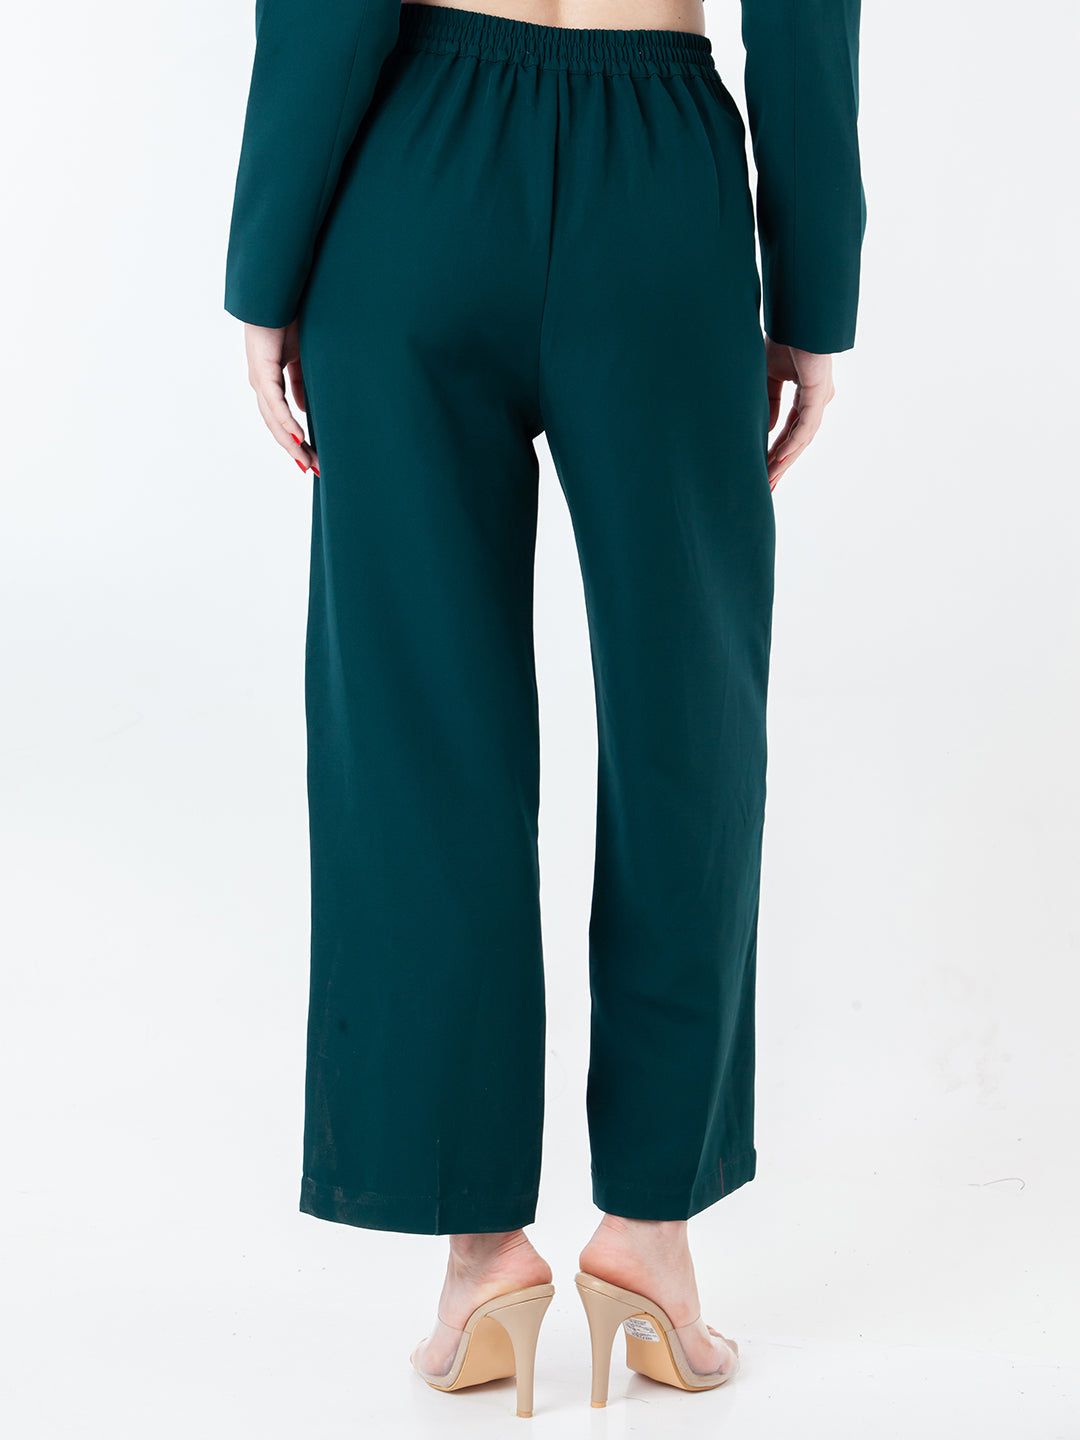 Green-Solid-Pleated-Trouser-L01009-4